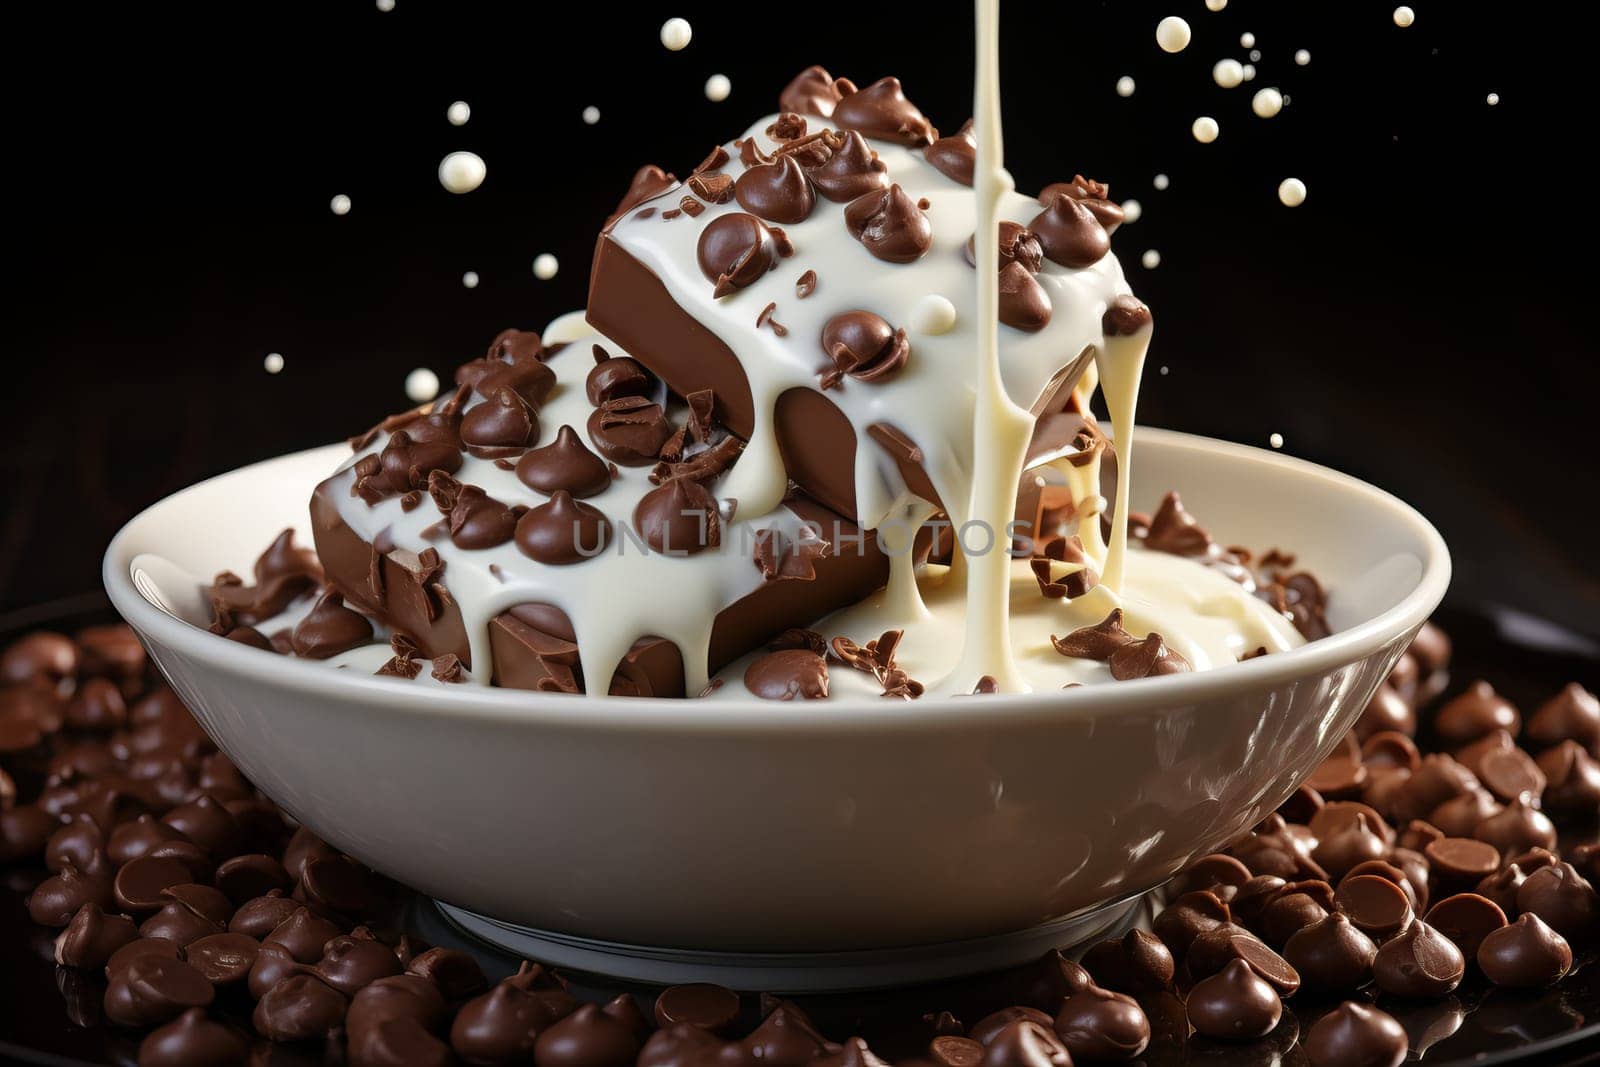 pieces of chocolate falling on chocolate sauce and a splash of milk cream on a black background.